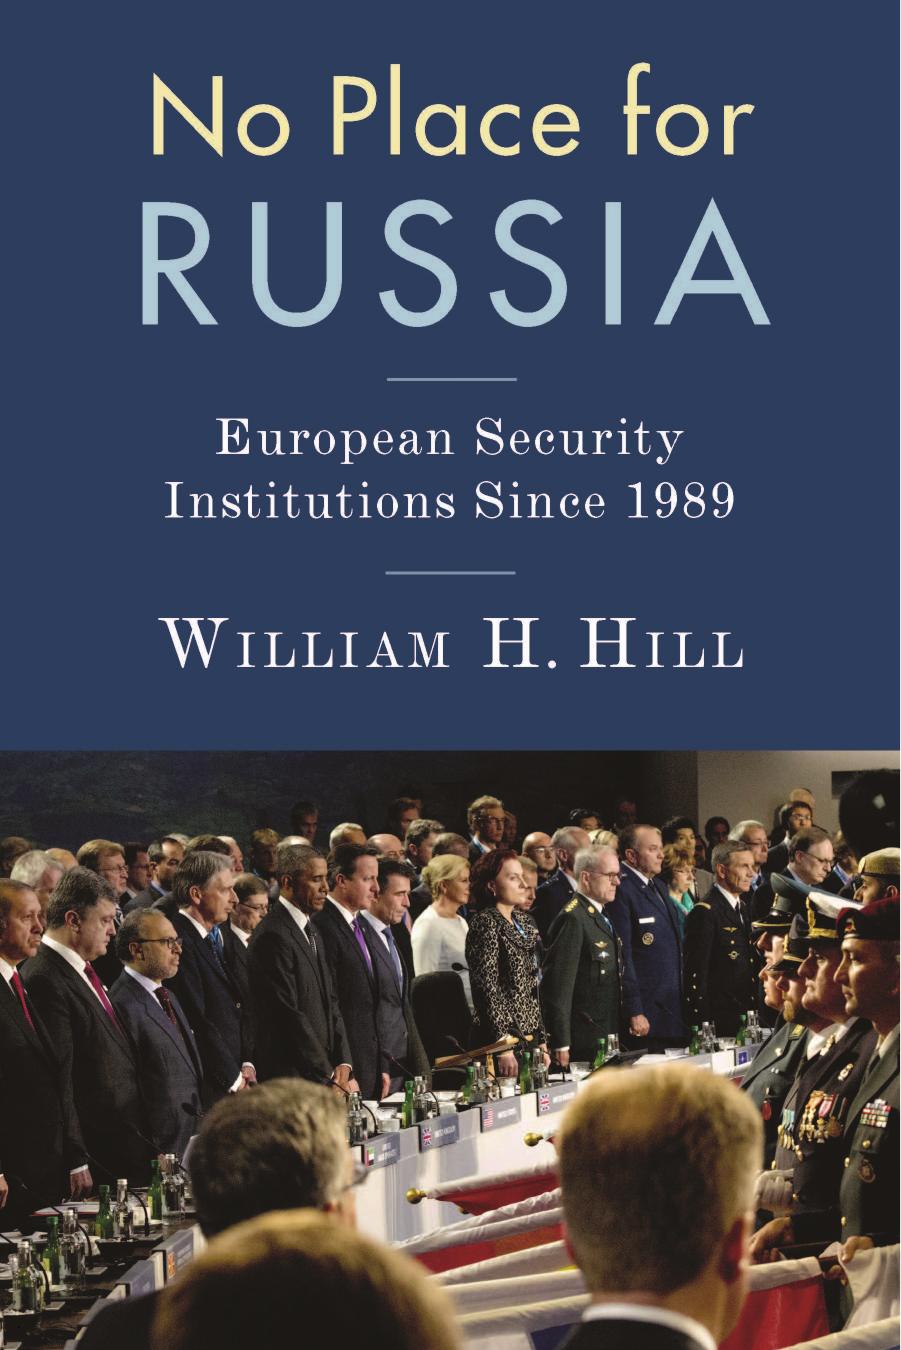 No Place for Russia: European Security Institutions Since 1989 by William H. Hill